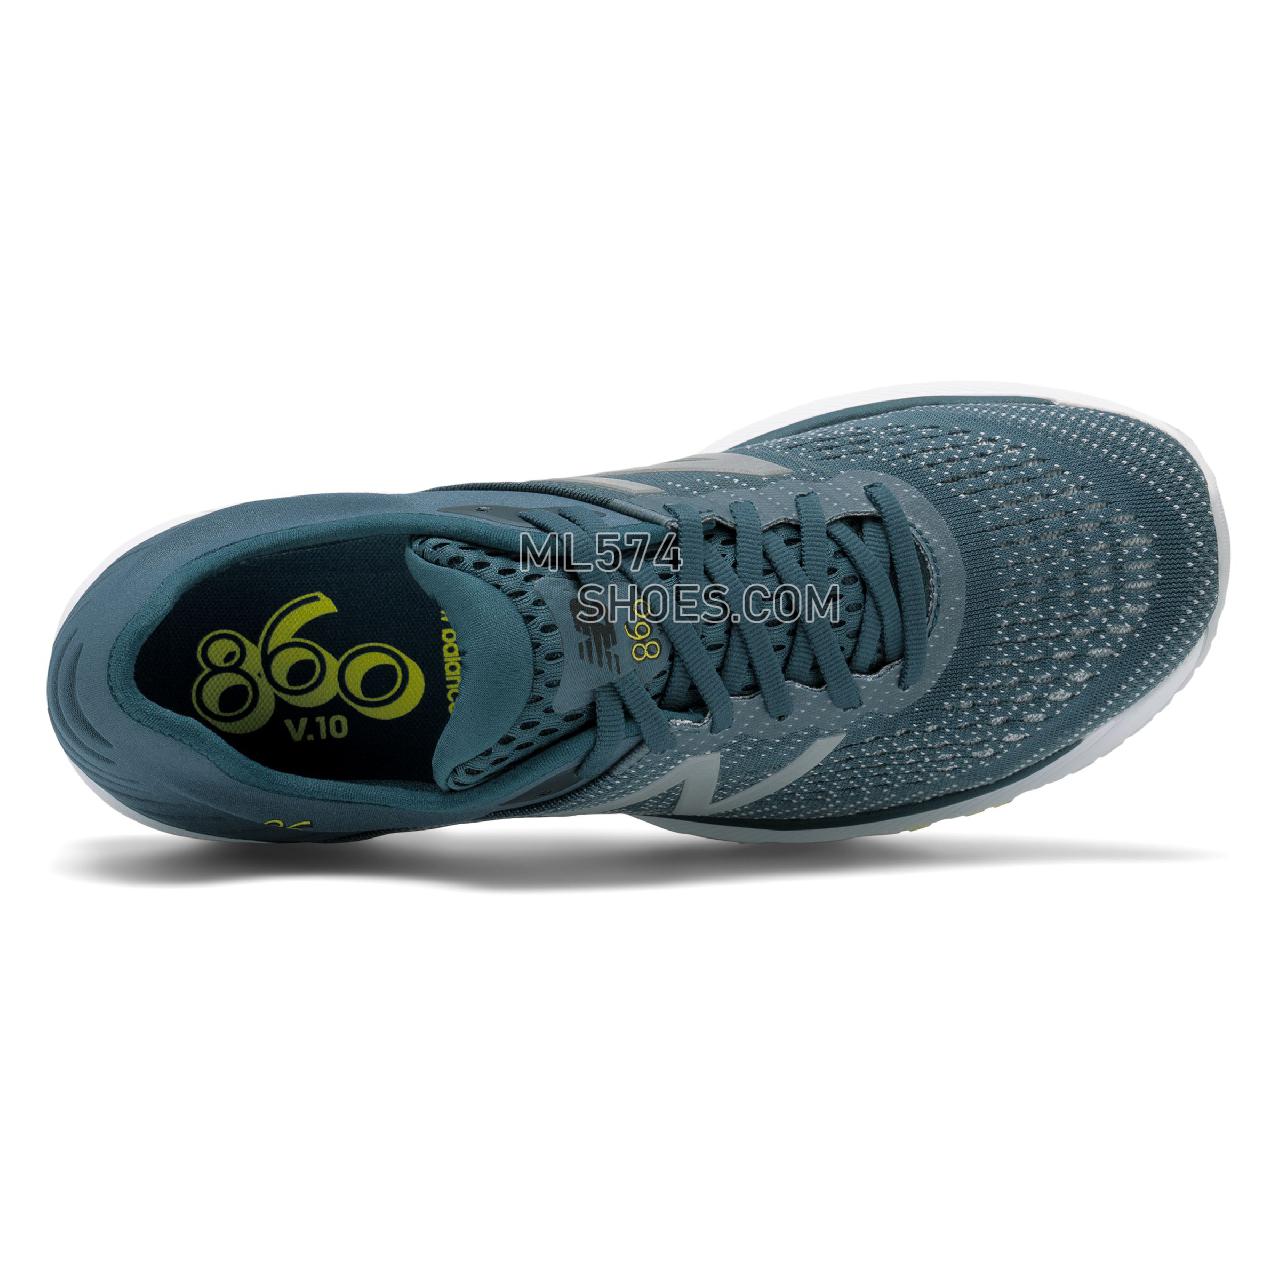 New Balance 860v10 - Men's Stability Running - Supercell with Orion Blue and Sulphur Yellow - M860A10